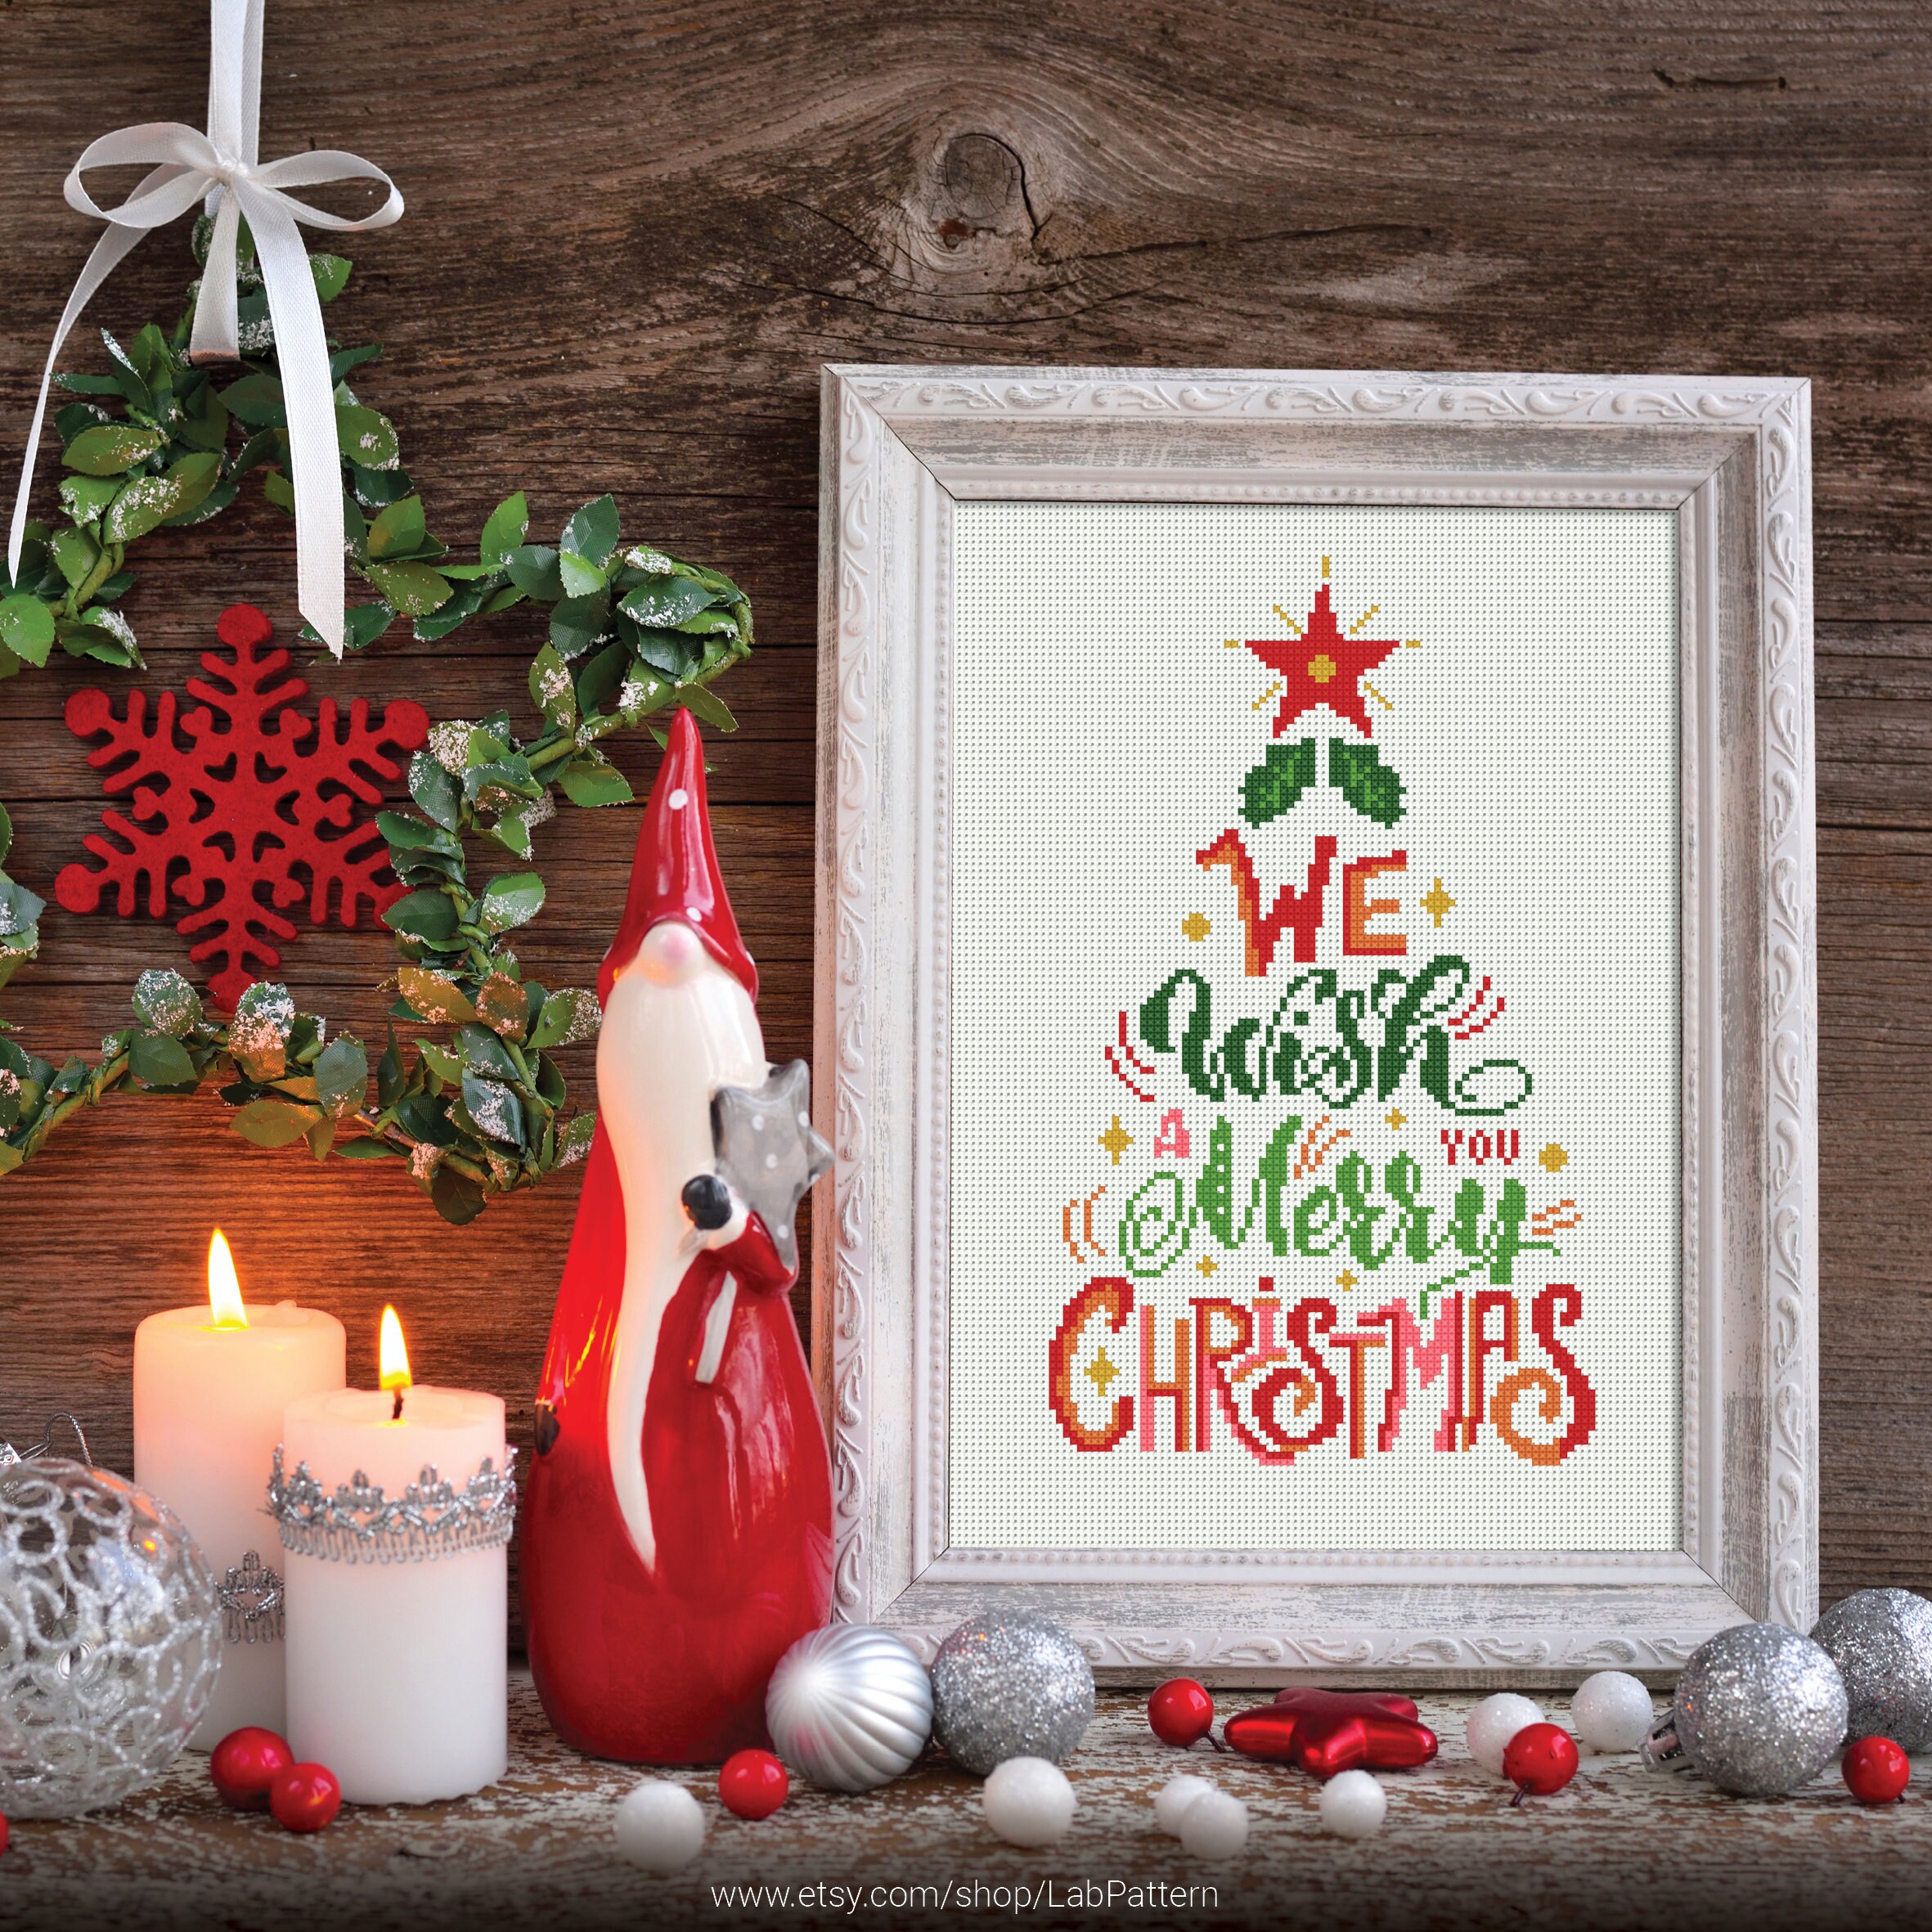 Christmas Tree We Wish You a Merry Christmas Cross Stitch - Etsy